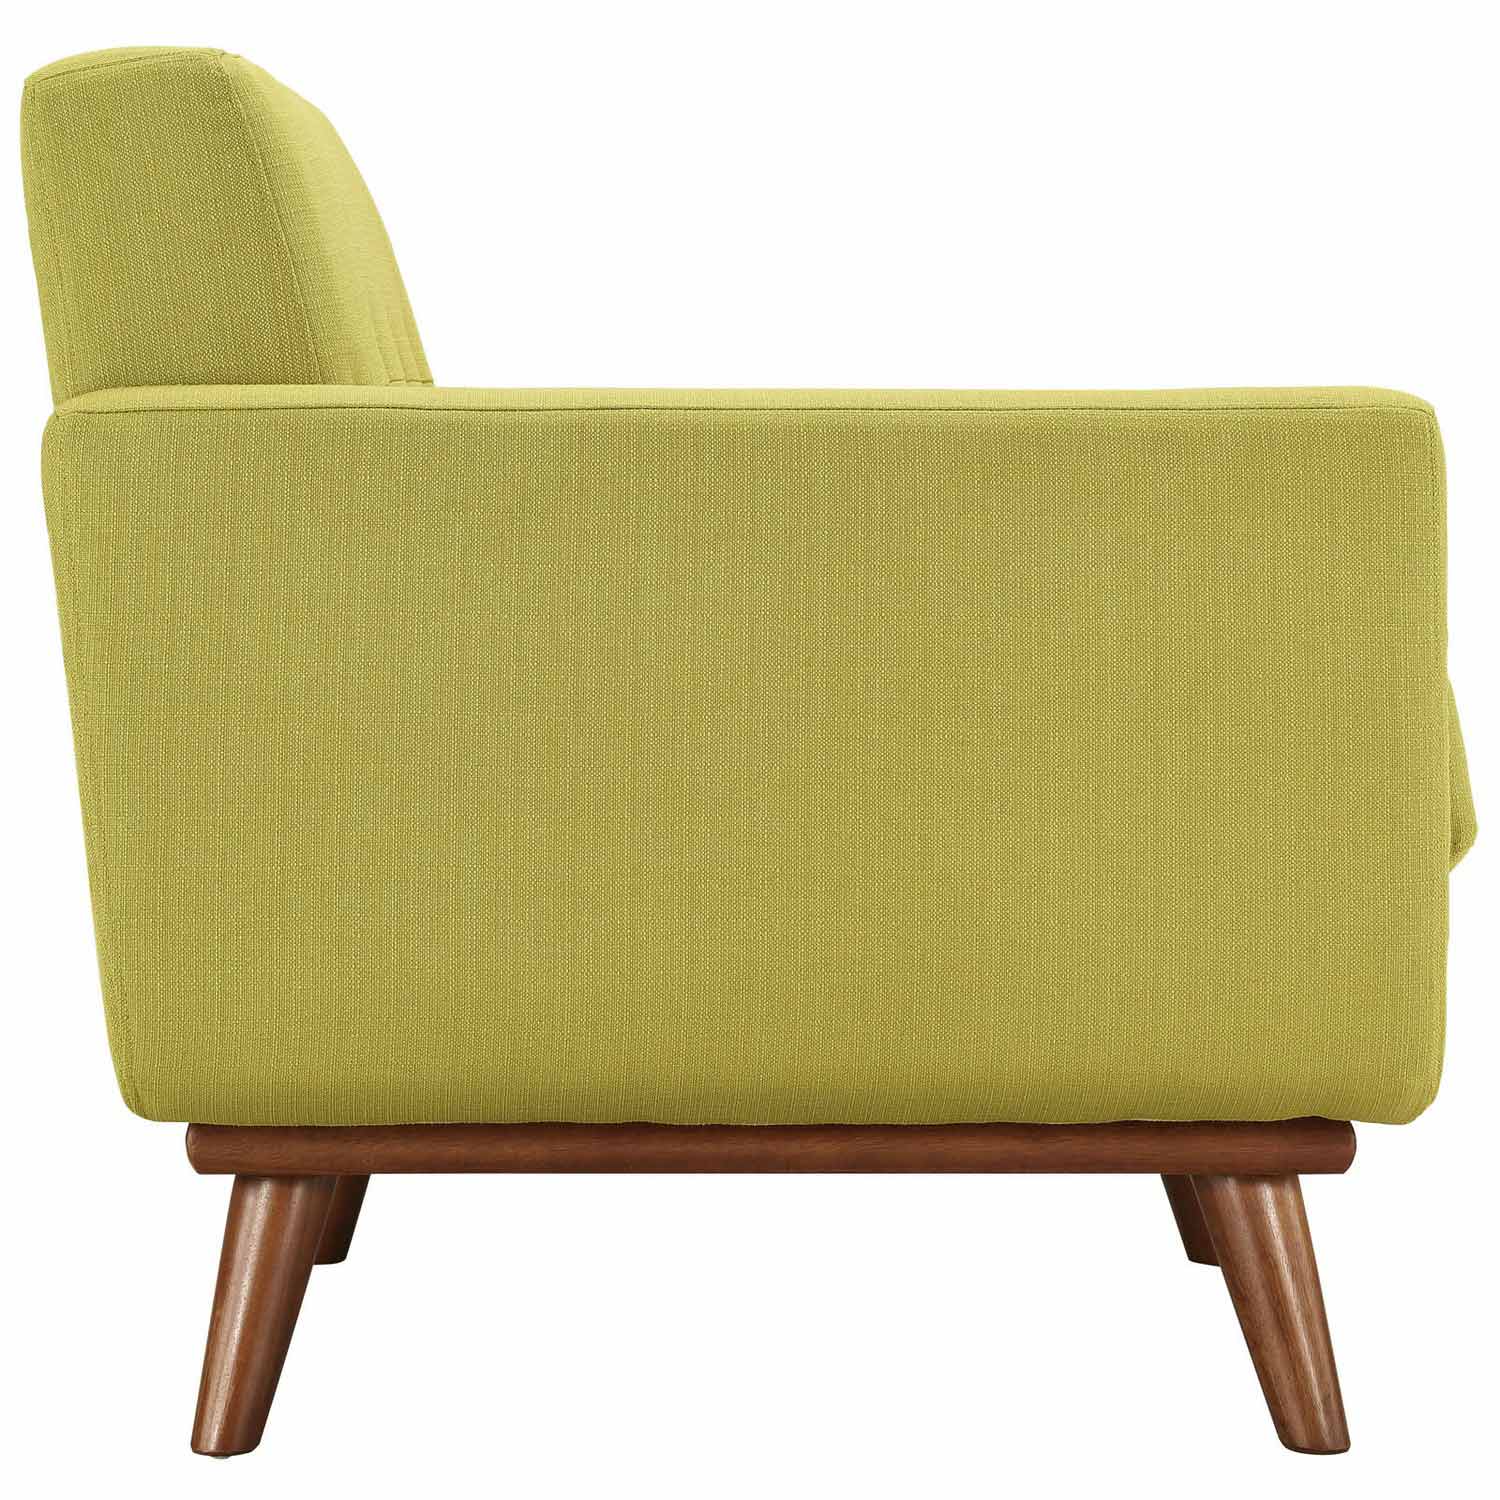 Modway Engage Armchairs and Sofa Set of 3 - Wheatgrass